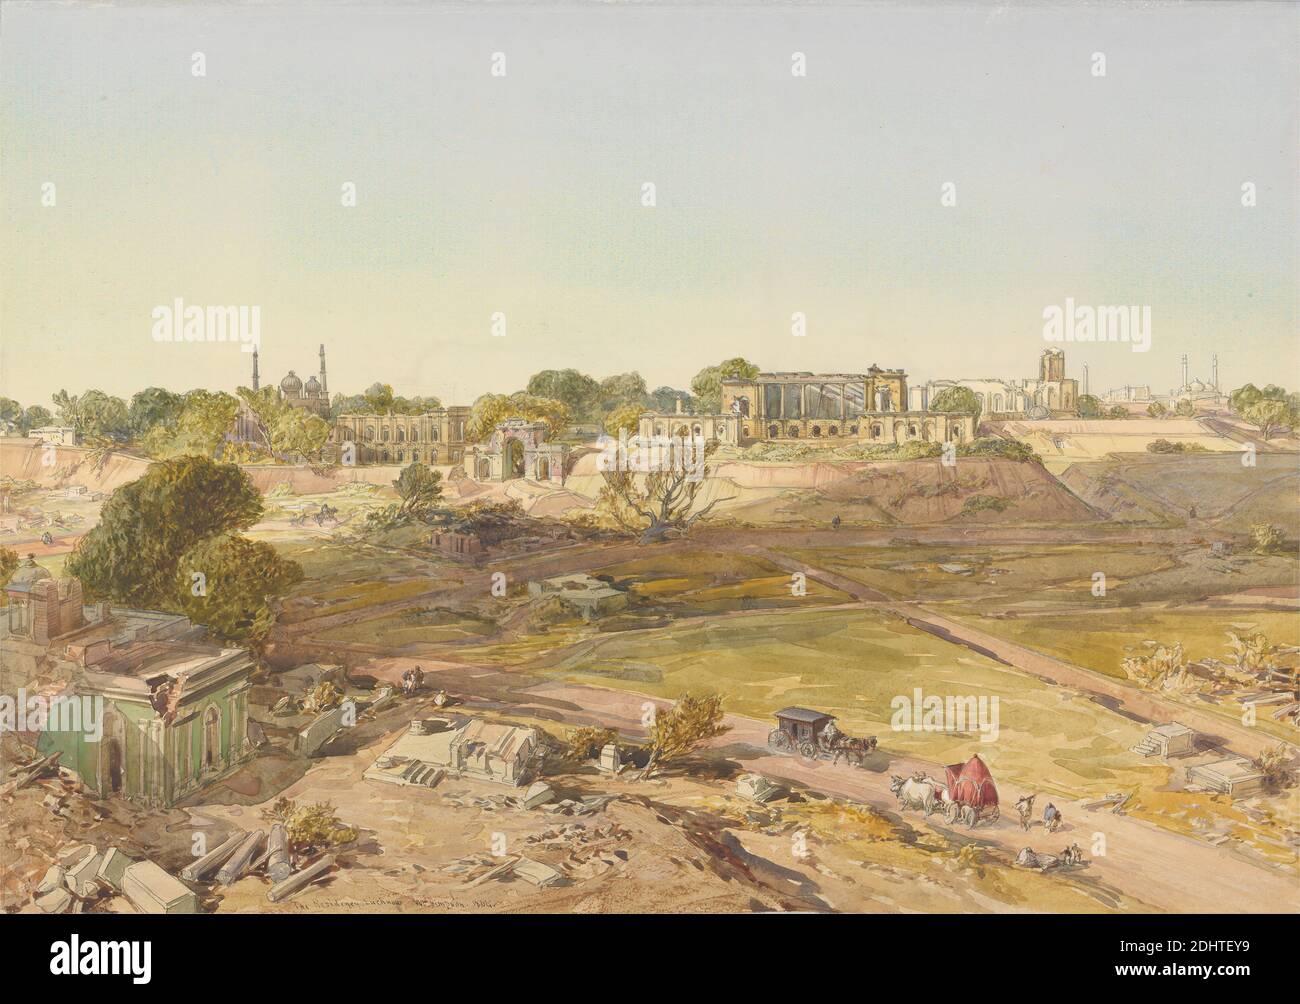 The Residency, Lucknow, William Simpson, 1823–1899, British, 1864, Watercolor and graphite on moderately thick, slightly textured, cream wove paper, Sheet: 14 5/8 x 20 1/2 inches (37.1 x 52.1 cm), architectural subject, carriages, columns, domes, figures, horses (animals), landscape, mosques, official residence, oxen, pillars, road, ruins, siege, walking, Asia, India, Lucknow, Uttar Pradesh Stock Photo